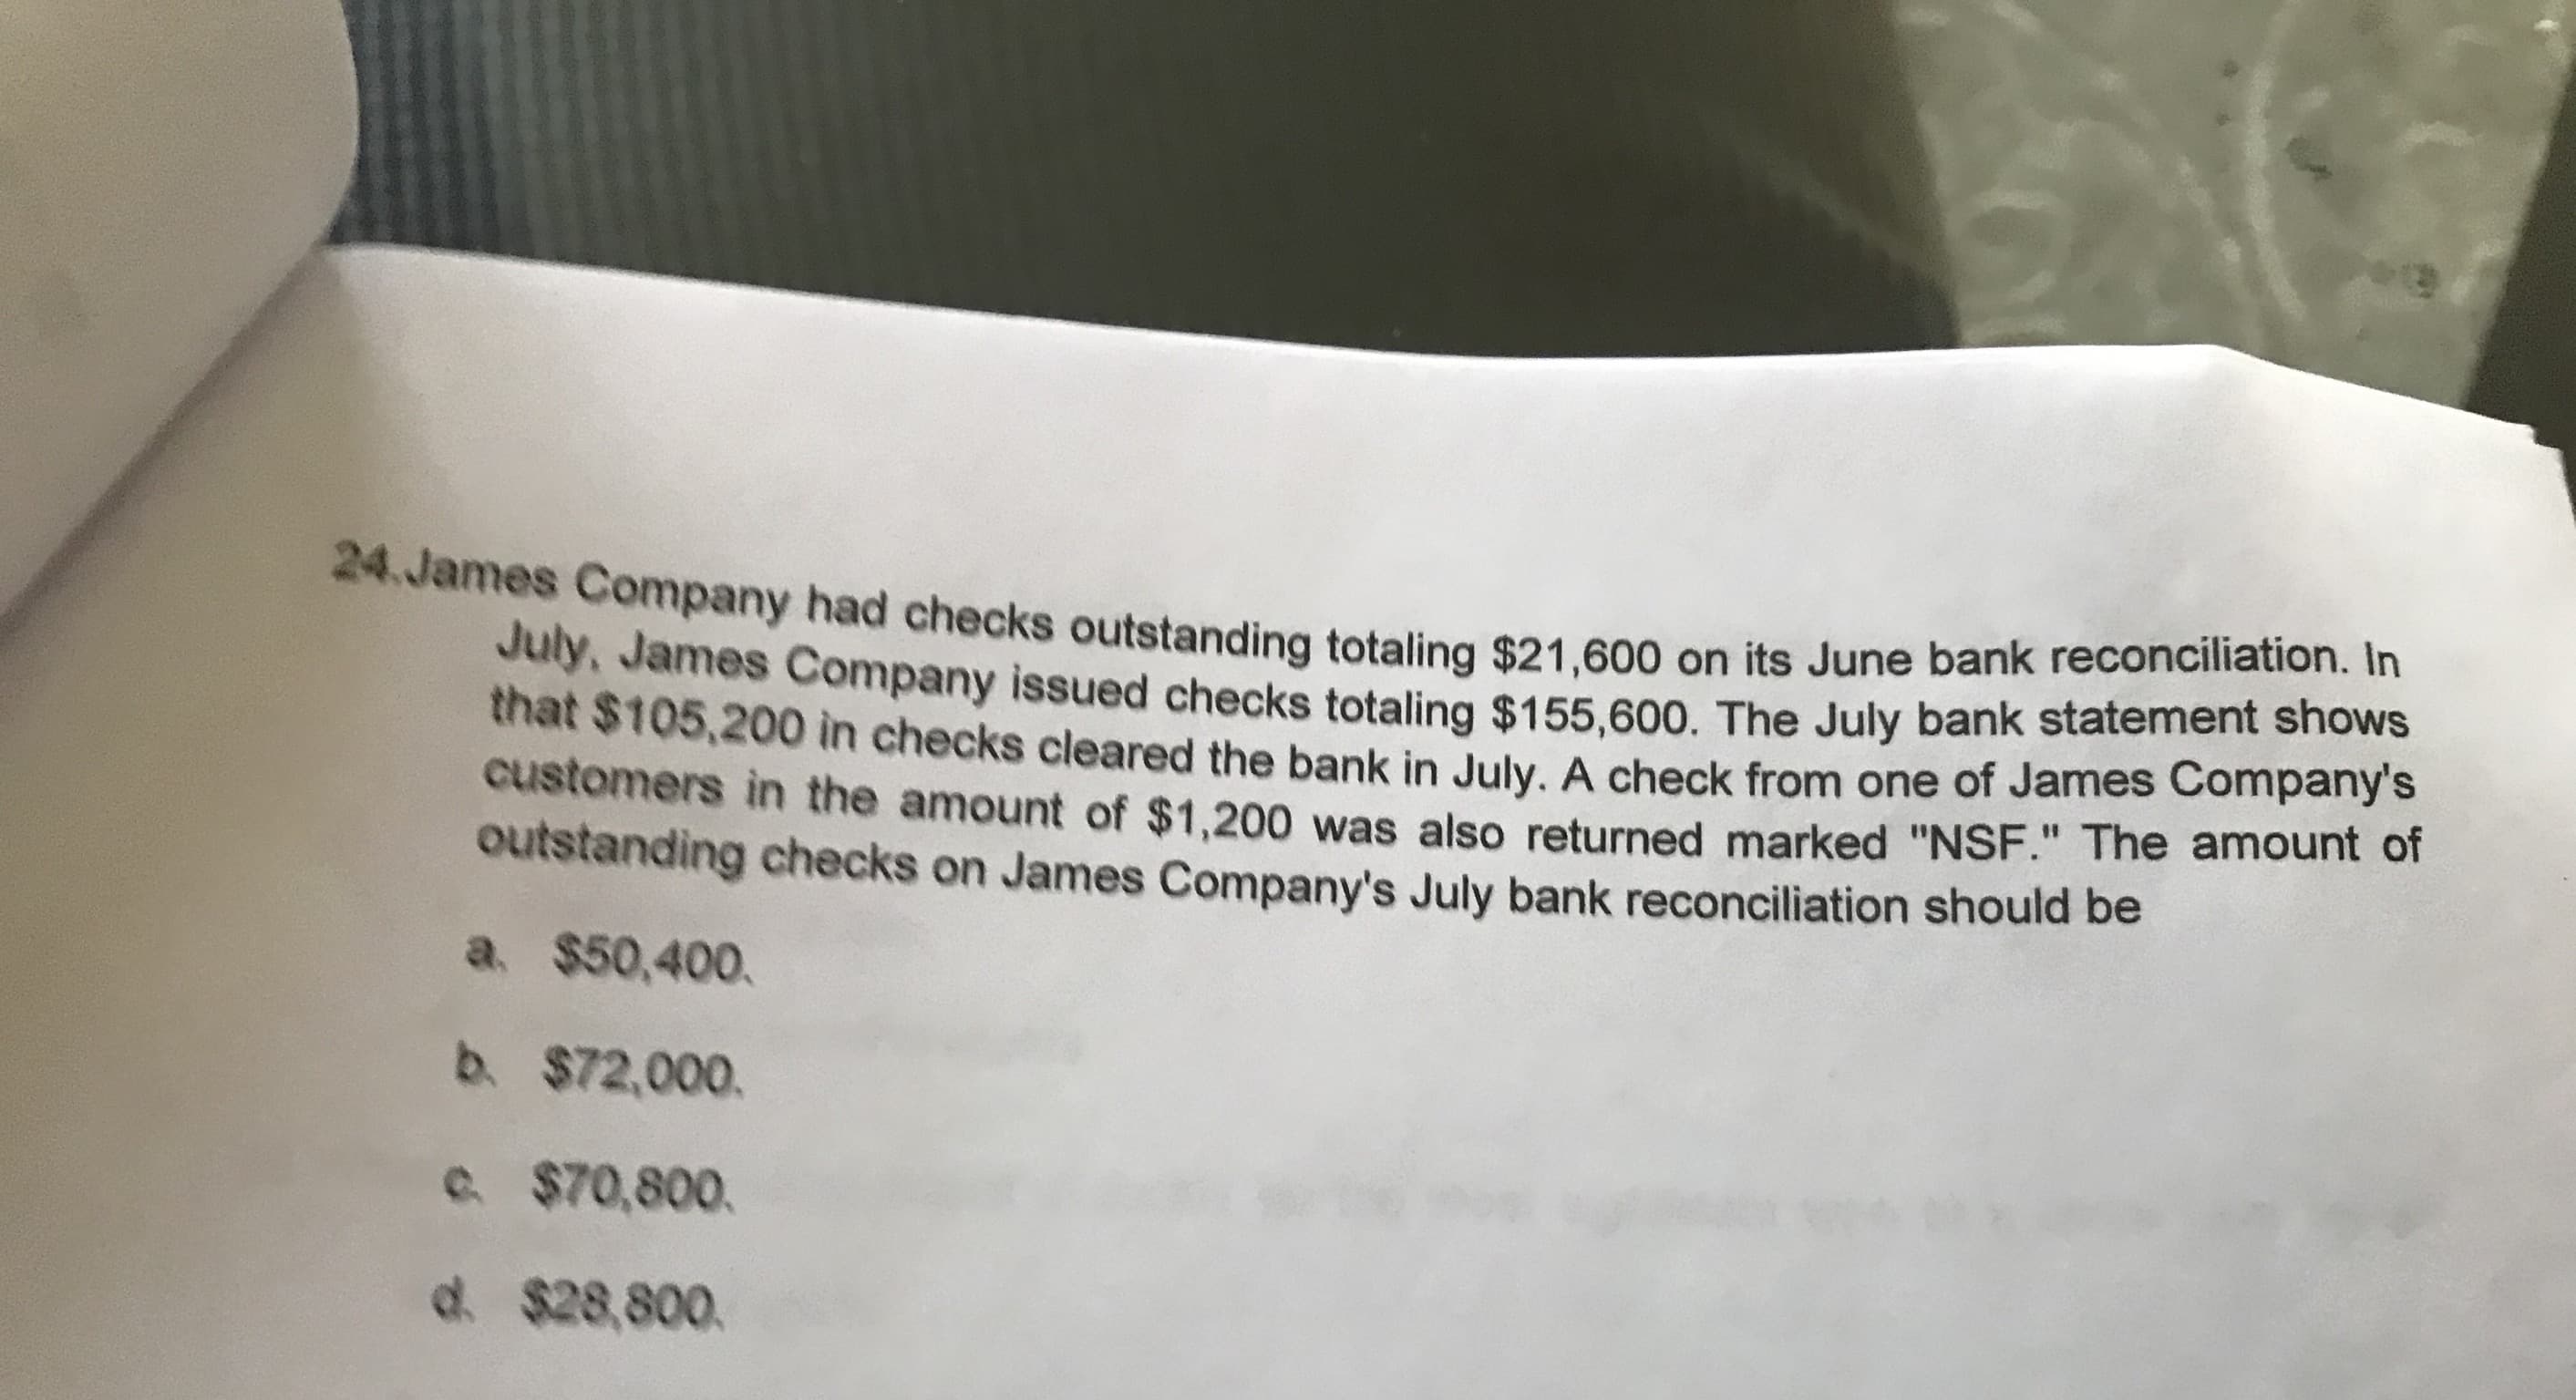 24.James Company had checks outstanding totaling $21,600 on its June bank reconciliation. In
July, James Company issued checks totaling $155.600. The July bank statement shows
that $105,200 in checks cleared the bank in July. A check from one of James Company's
customers in the amount of $1,200 was also returned marked "NSF." The amount or
outstanding checks on James Company's July bank reconciliation should be
a. $50,400.
b. $72,000.
e $70,800.
d. $28,800.
